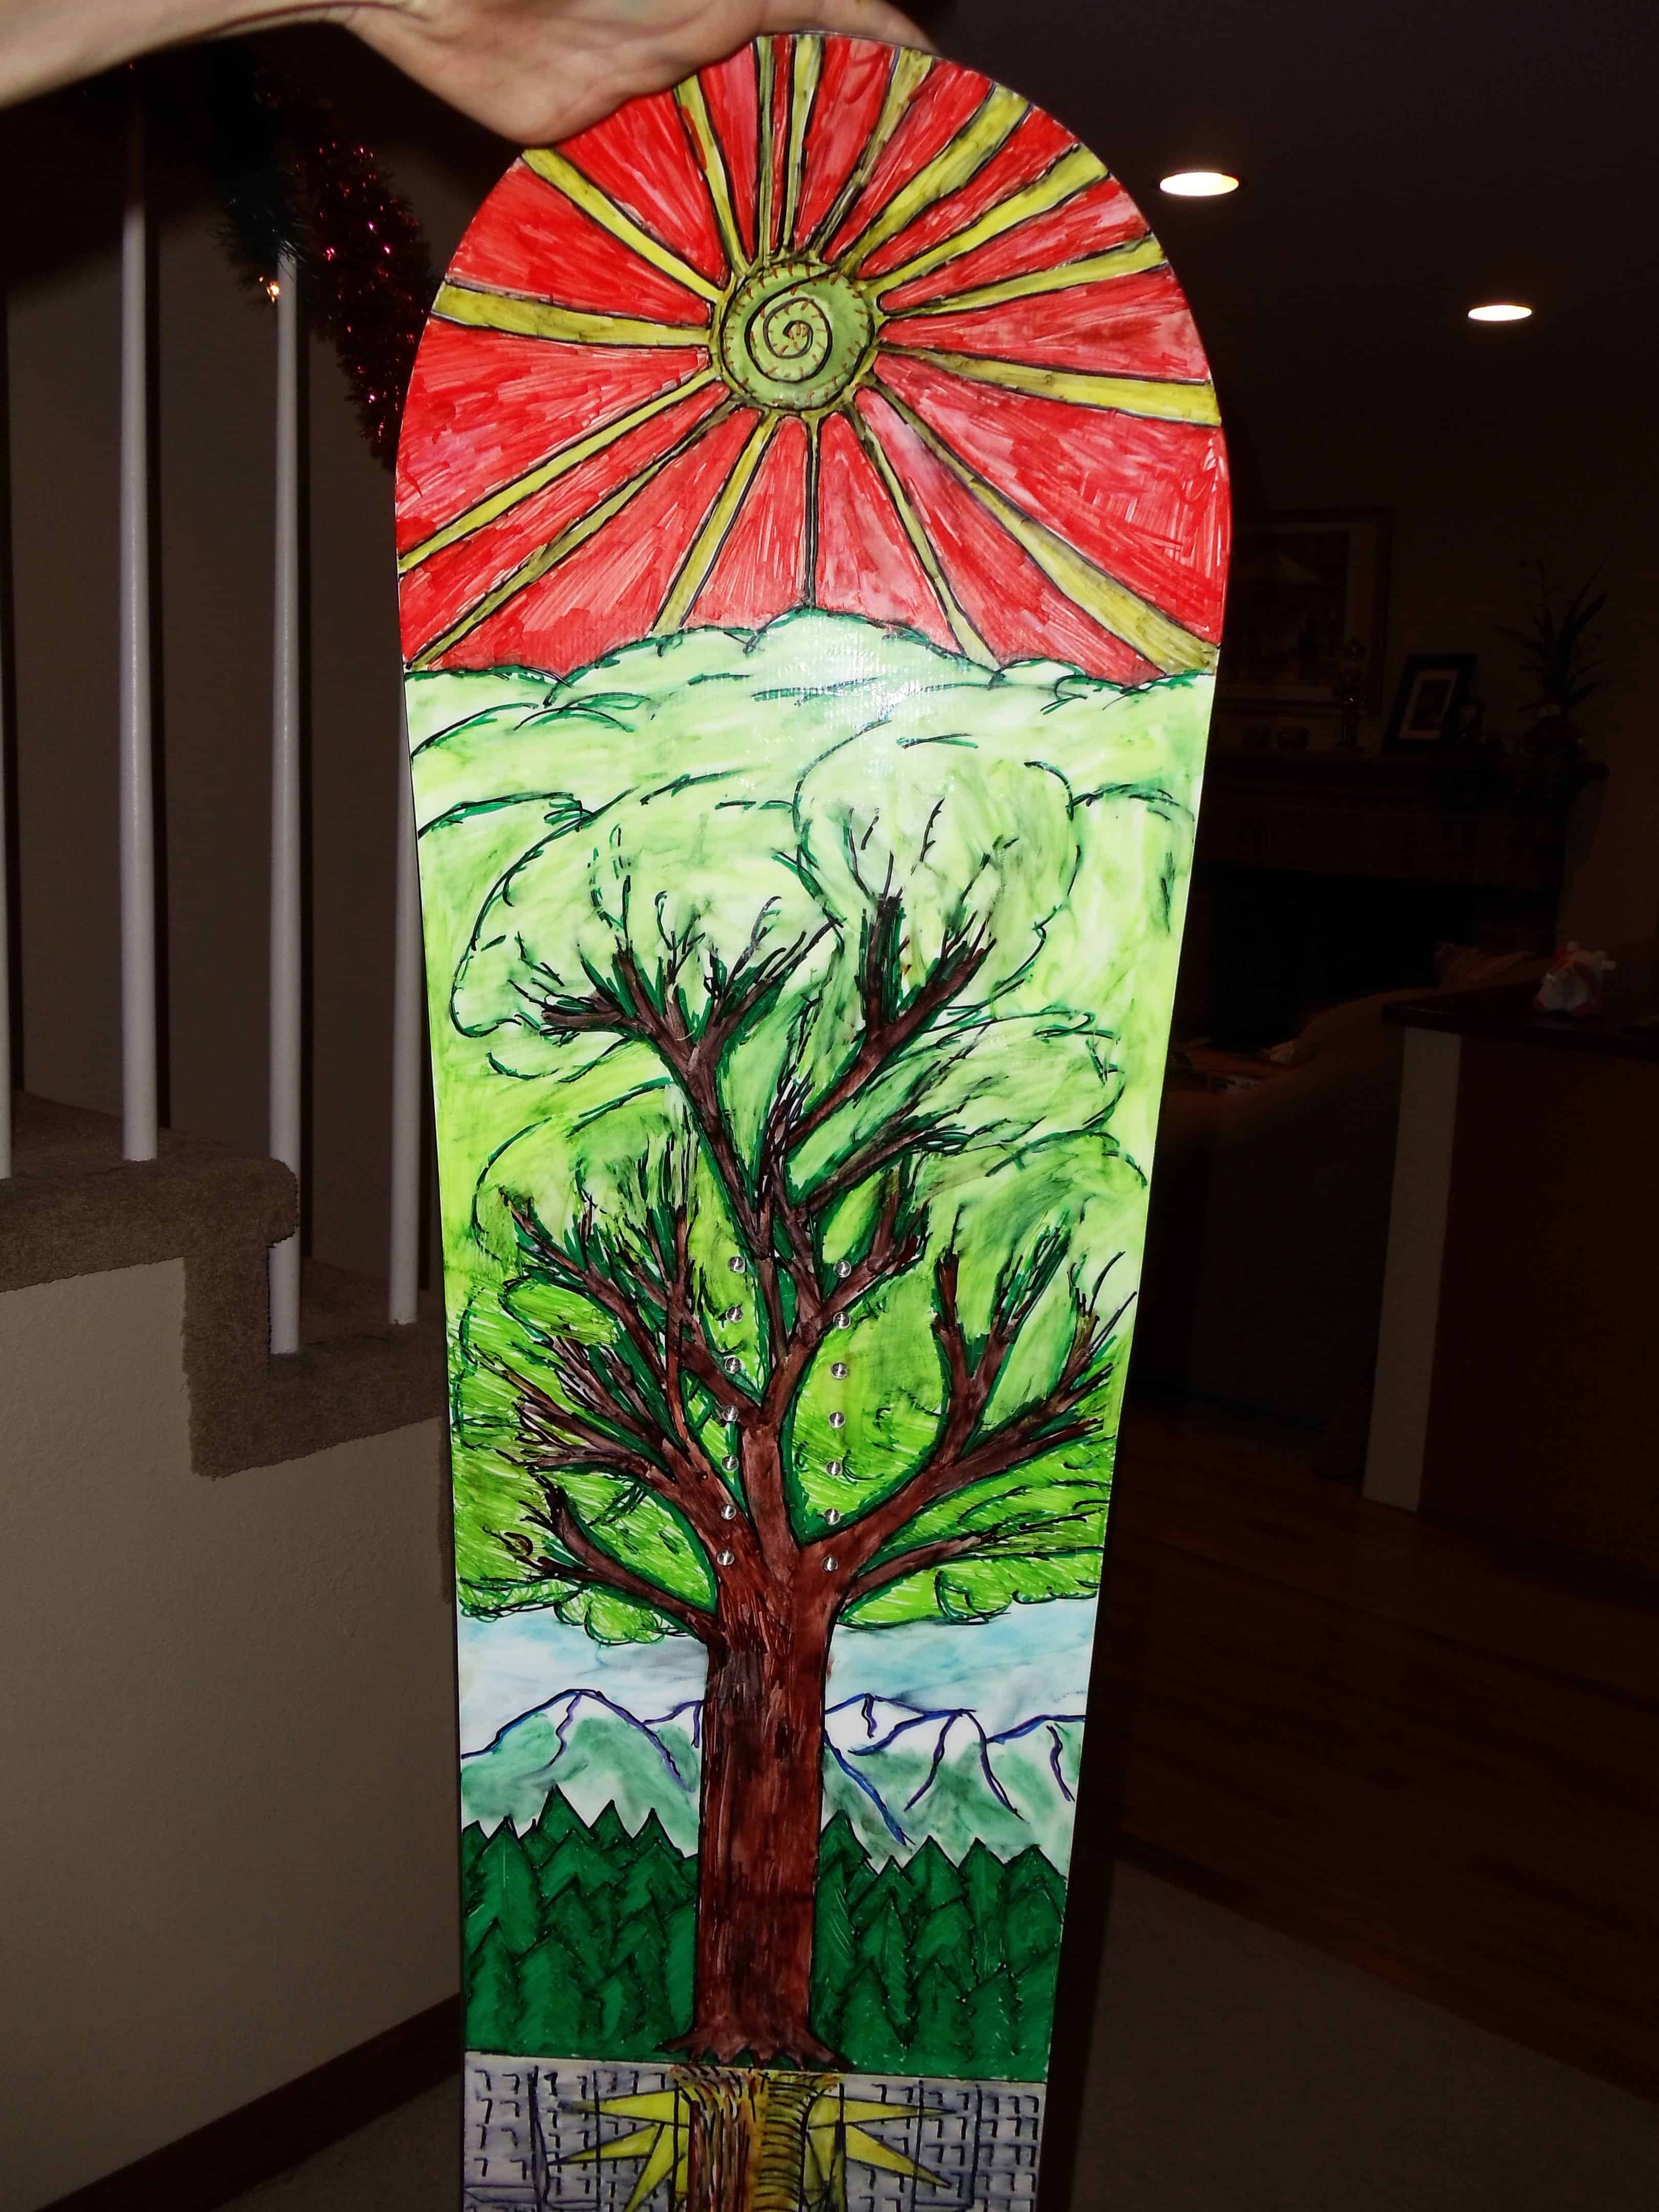 Sharpie Board Art - Blank Snowboards - User Submitted